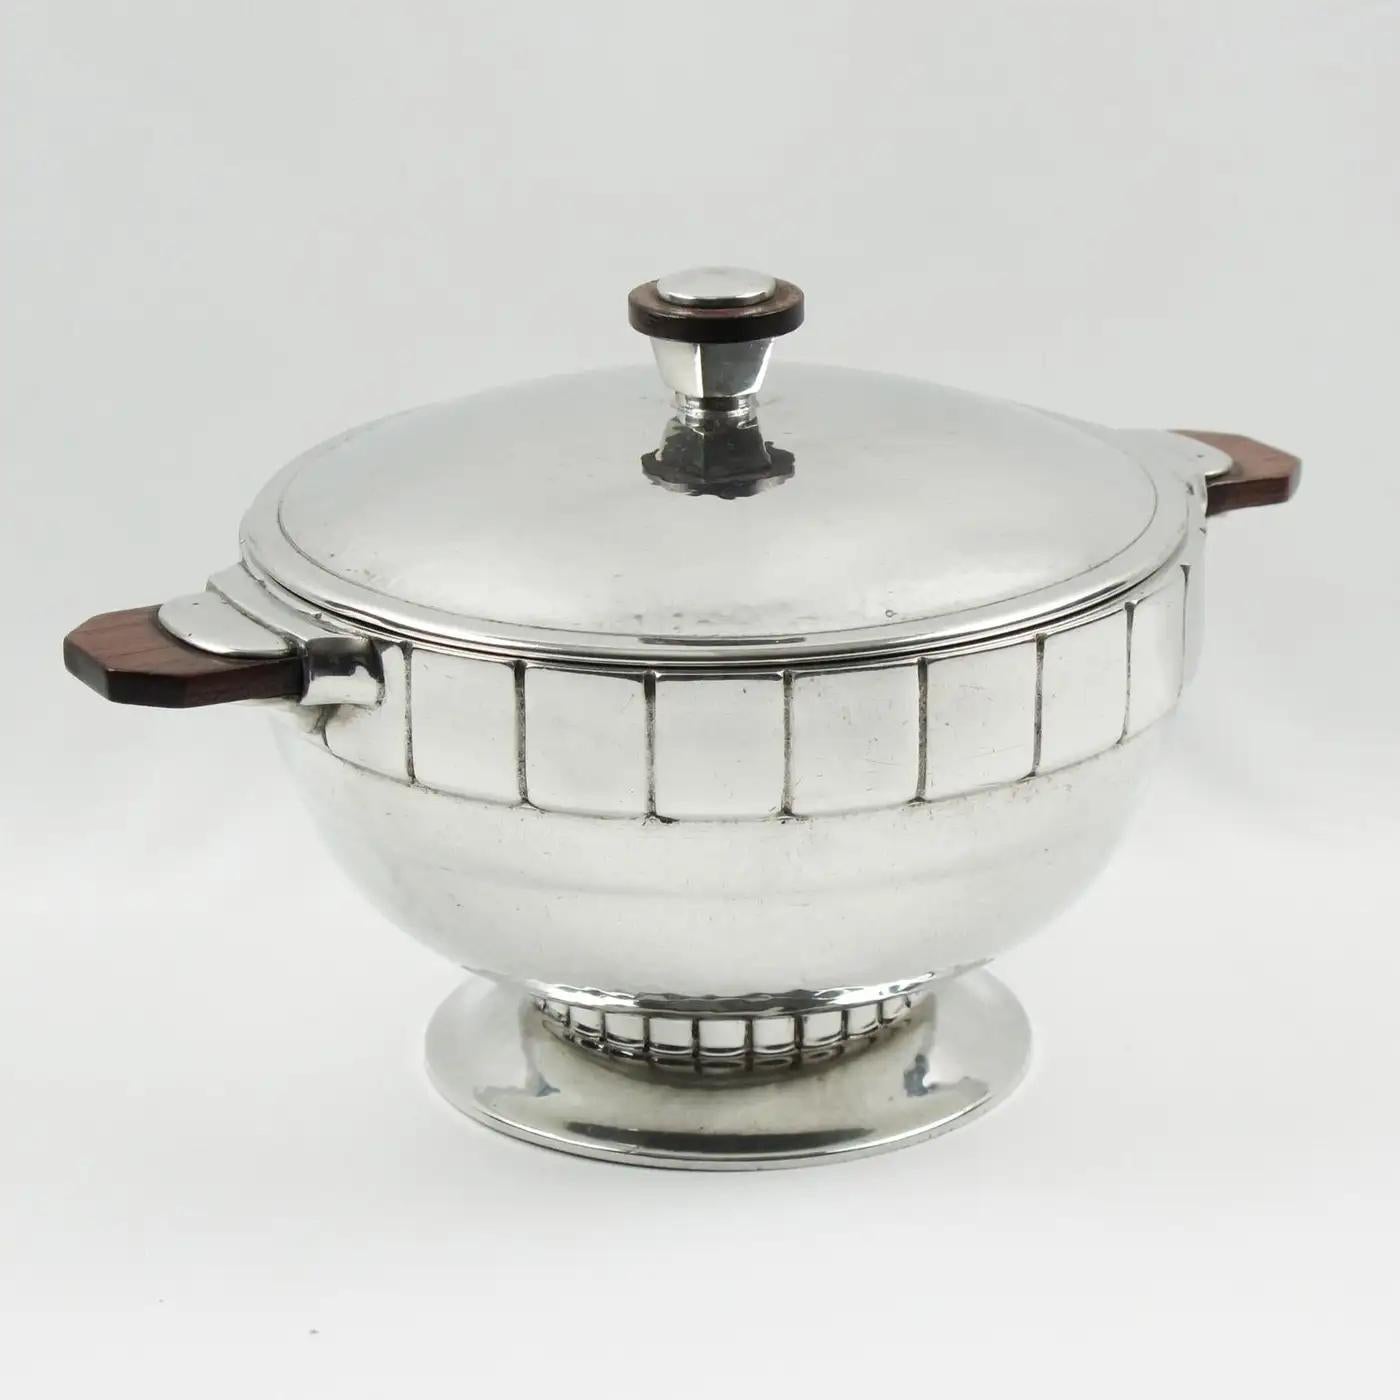 Art Deco Pewter Tureen Covered Dish Centerpiece by H.J. Swiss, 1940s For Sale 2